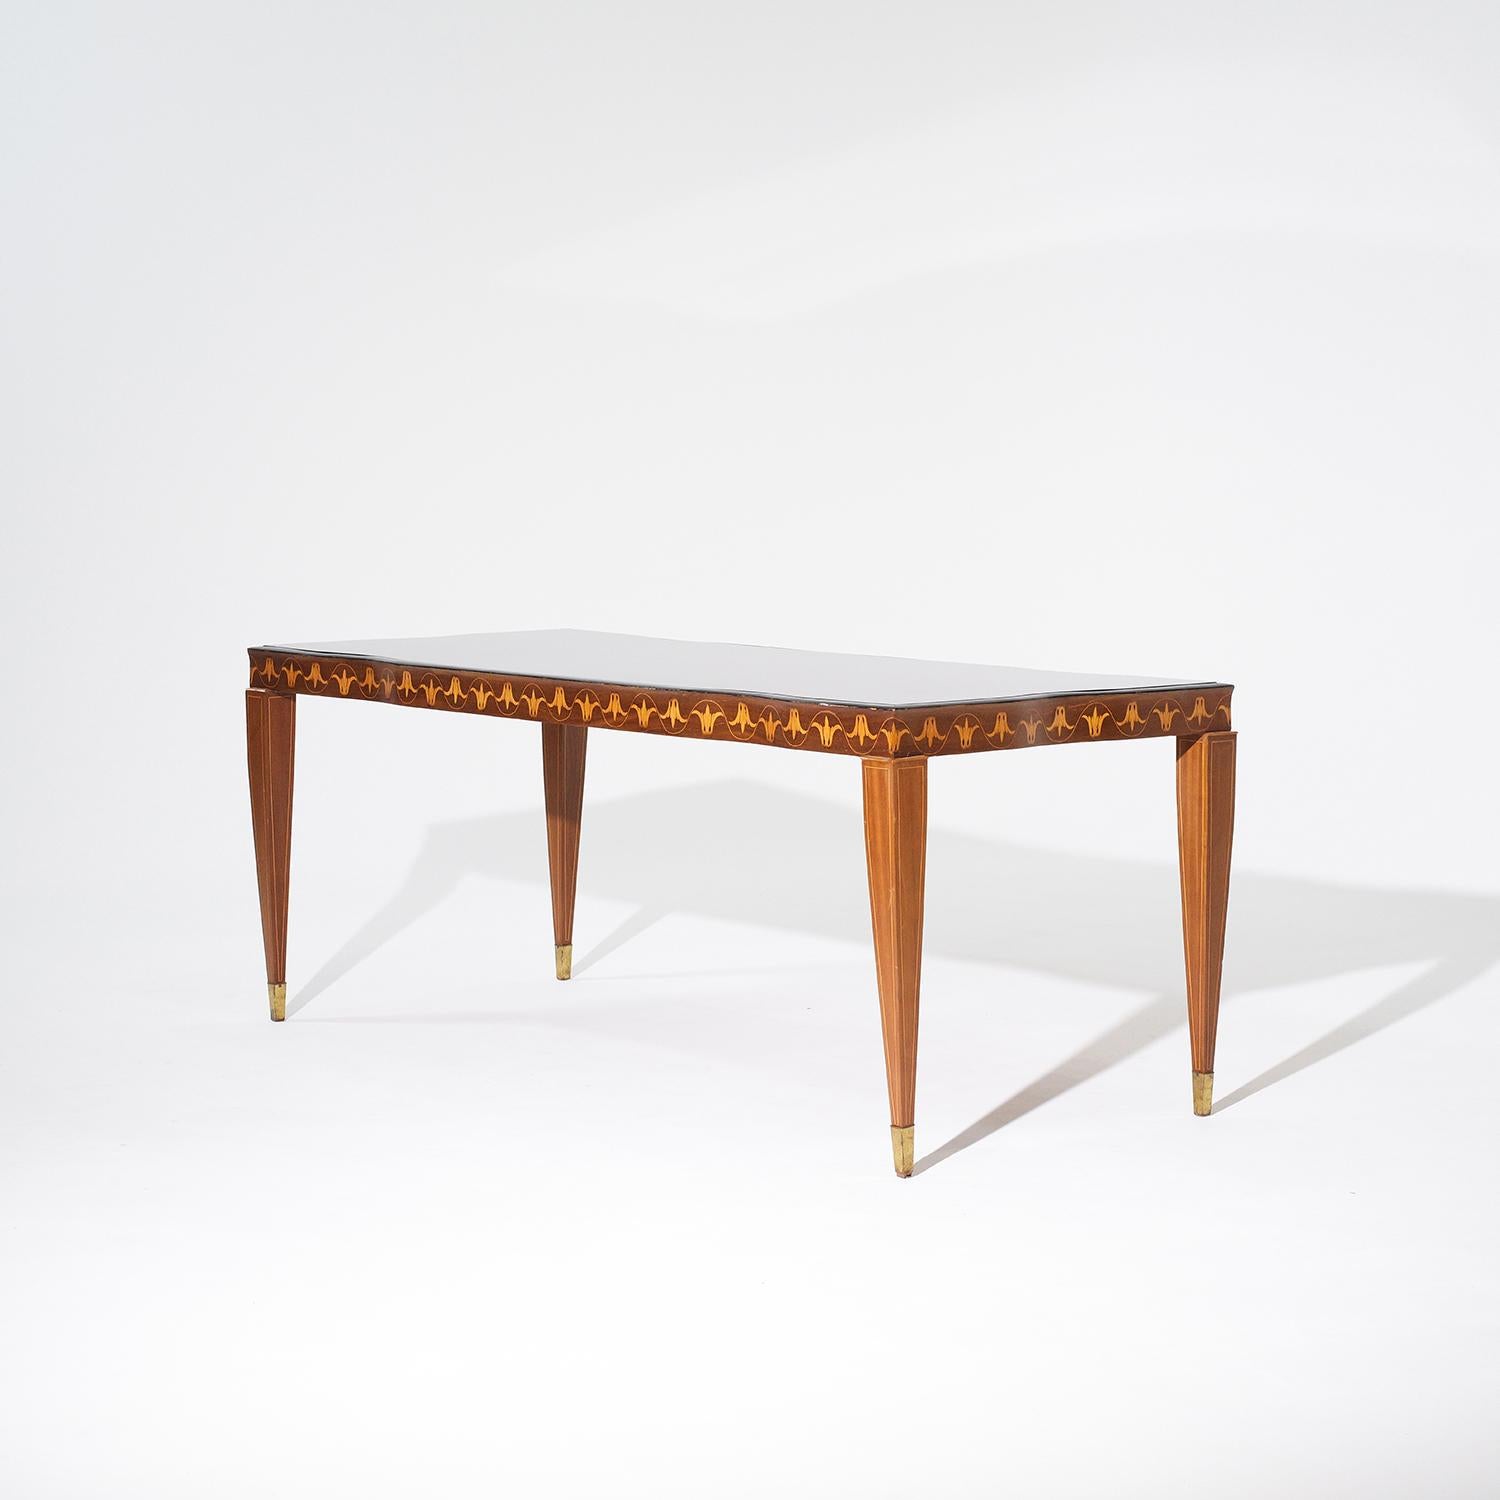 20th Century Italian Rosewood Dining Table by Paolo Buffa & Serafino Arrighi In Good Condition For Sale In West Palm Beach, FL